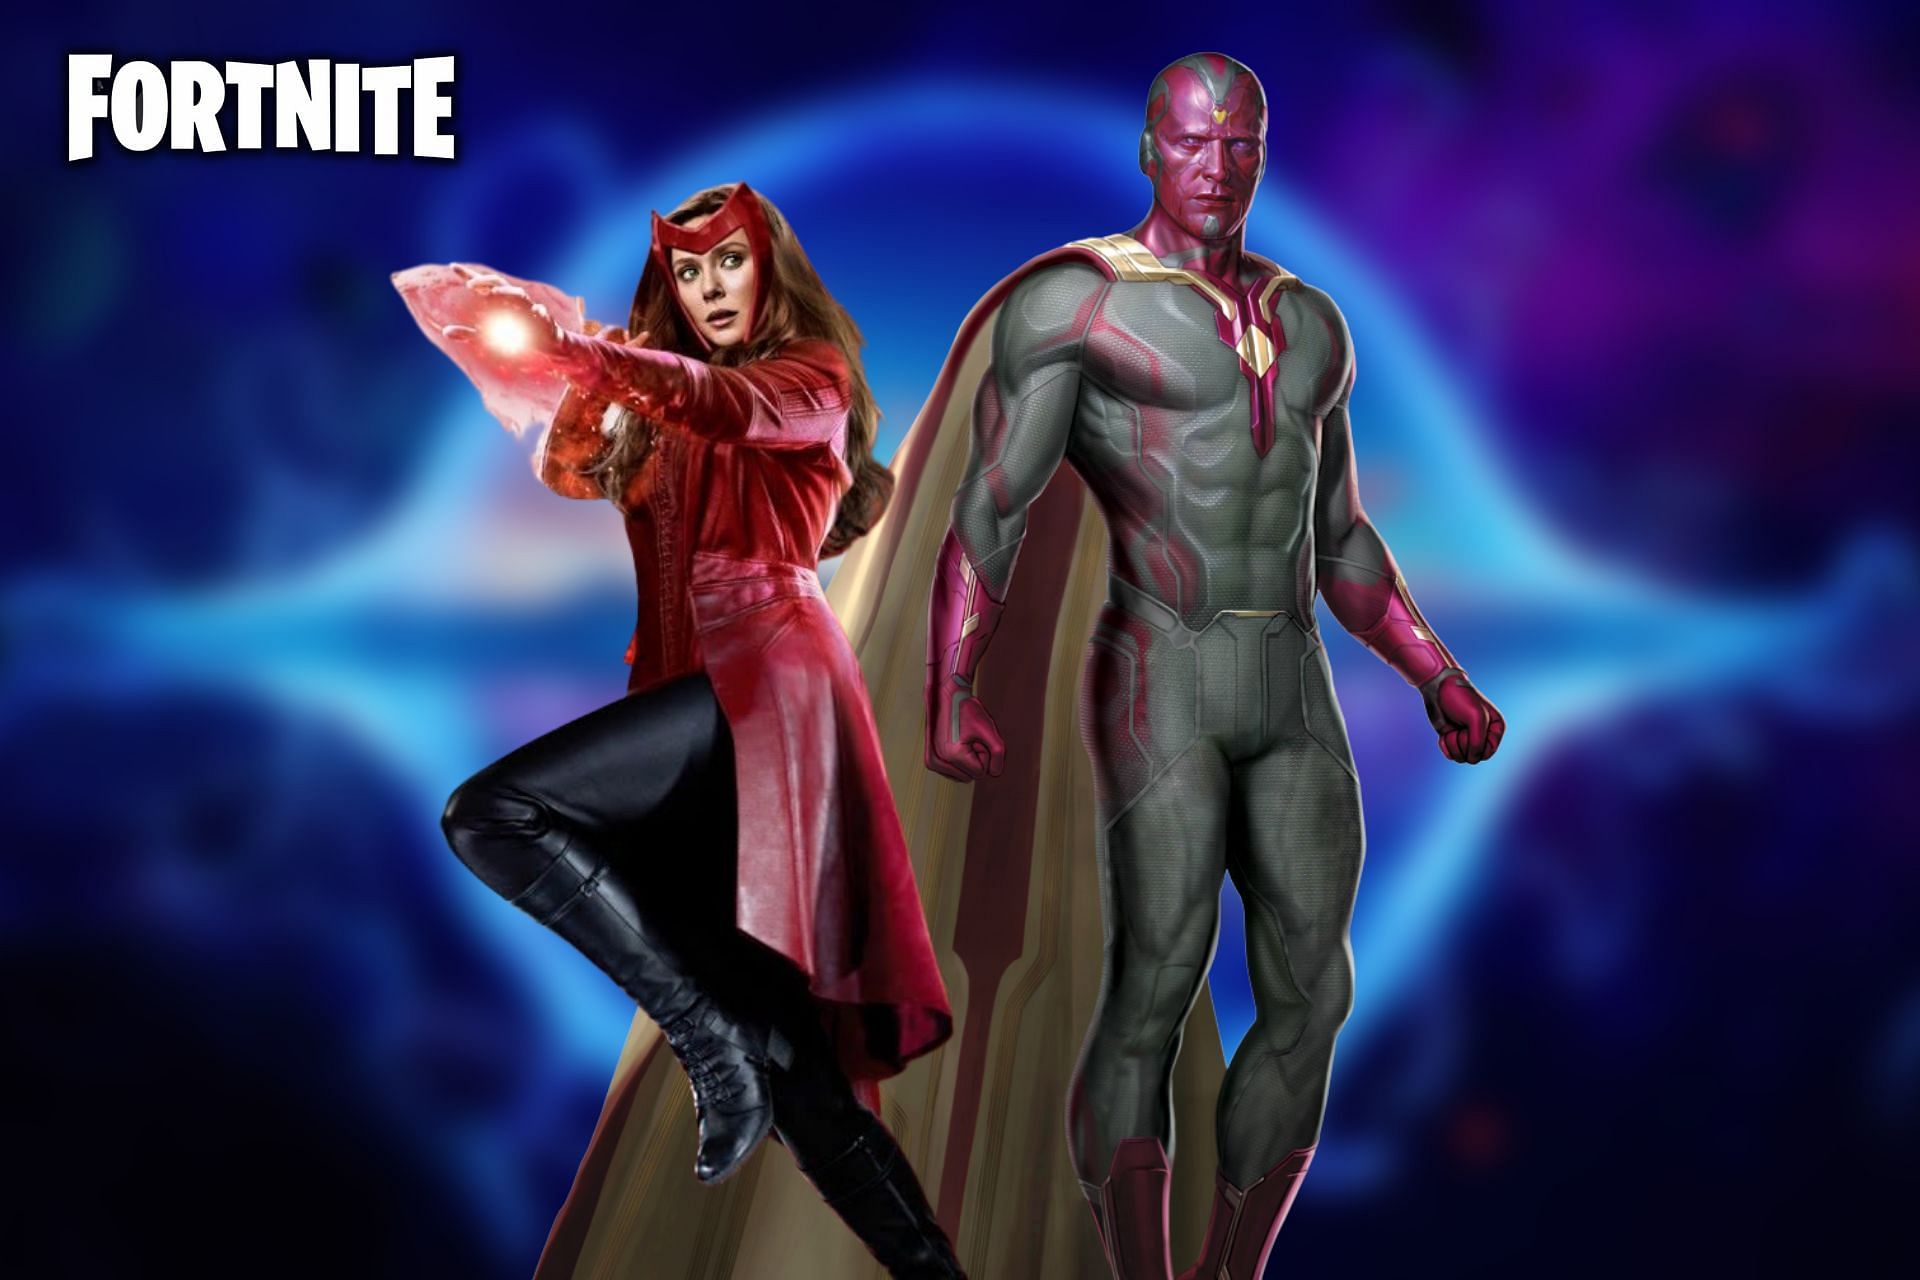 Wanda and Vision from the Marvel Cinematic Universe could arrive in Fortnite Chapter 3 Season 2 (Image via Sportskeeda)